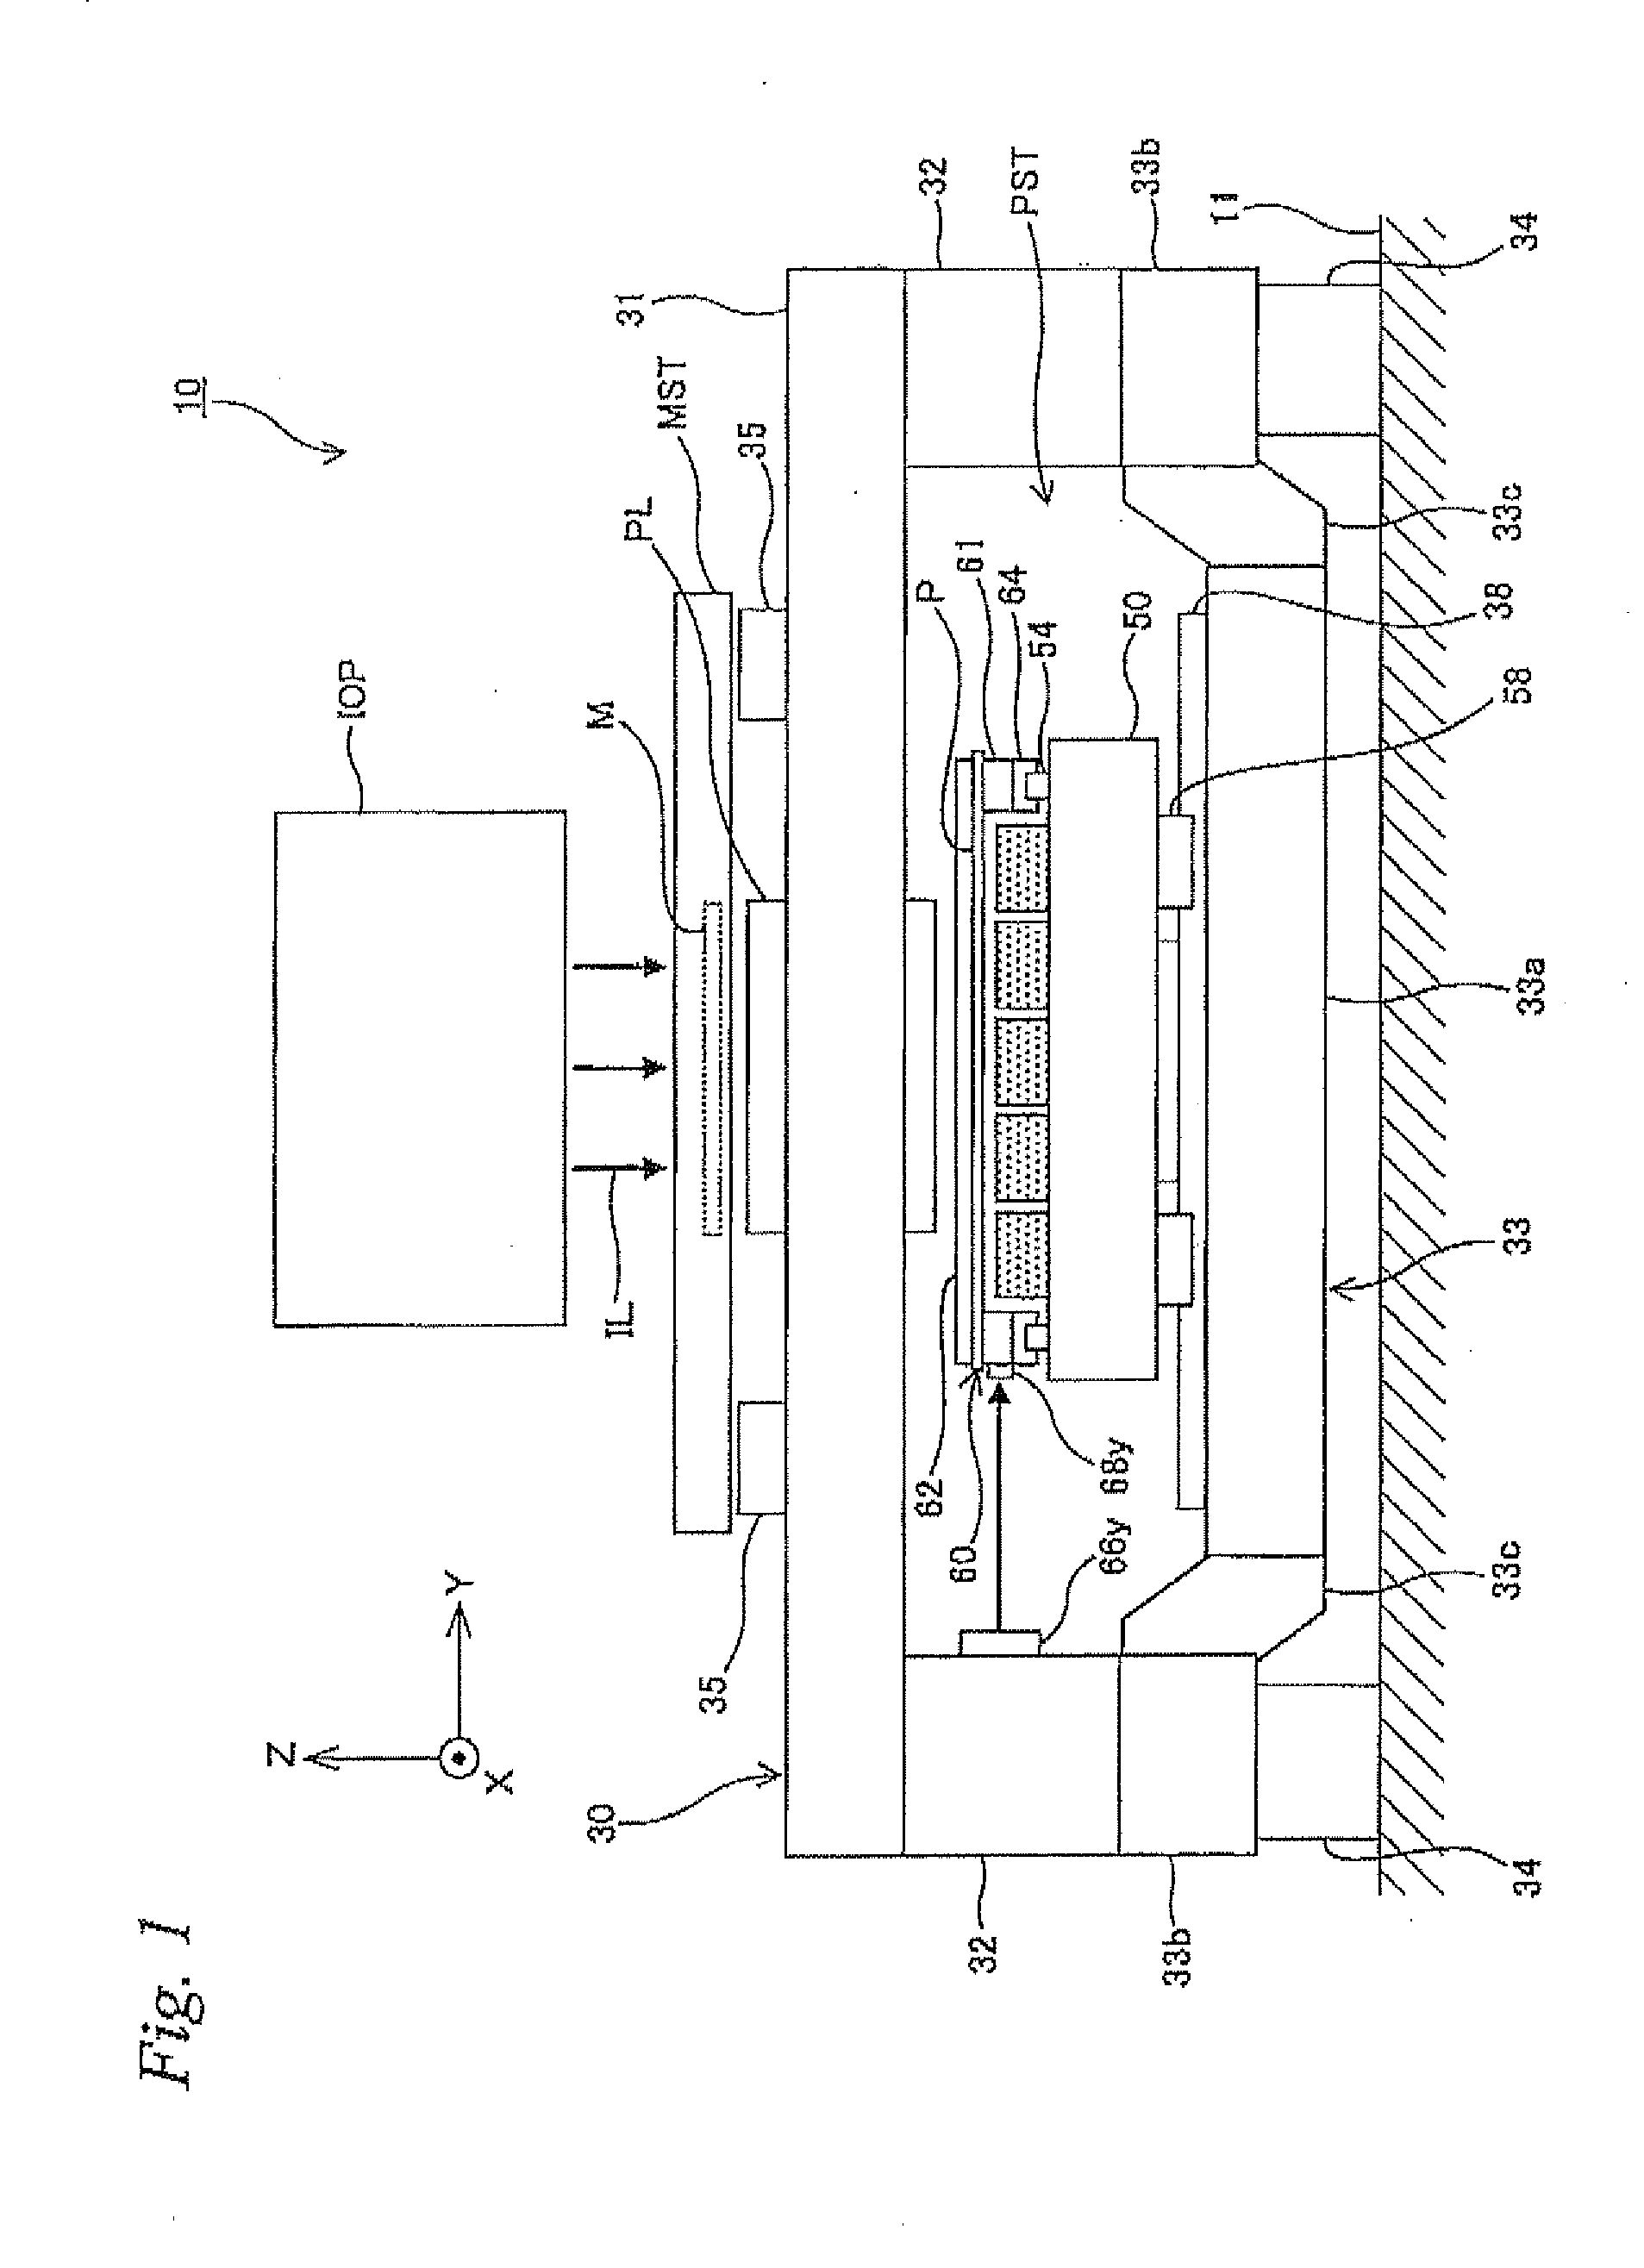 Movable body apparatus, object processing device, exposure apparatus, flat-panel display manufacturing method, and device manufacturing method